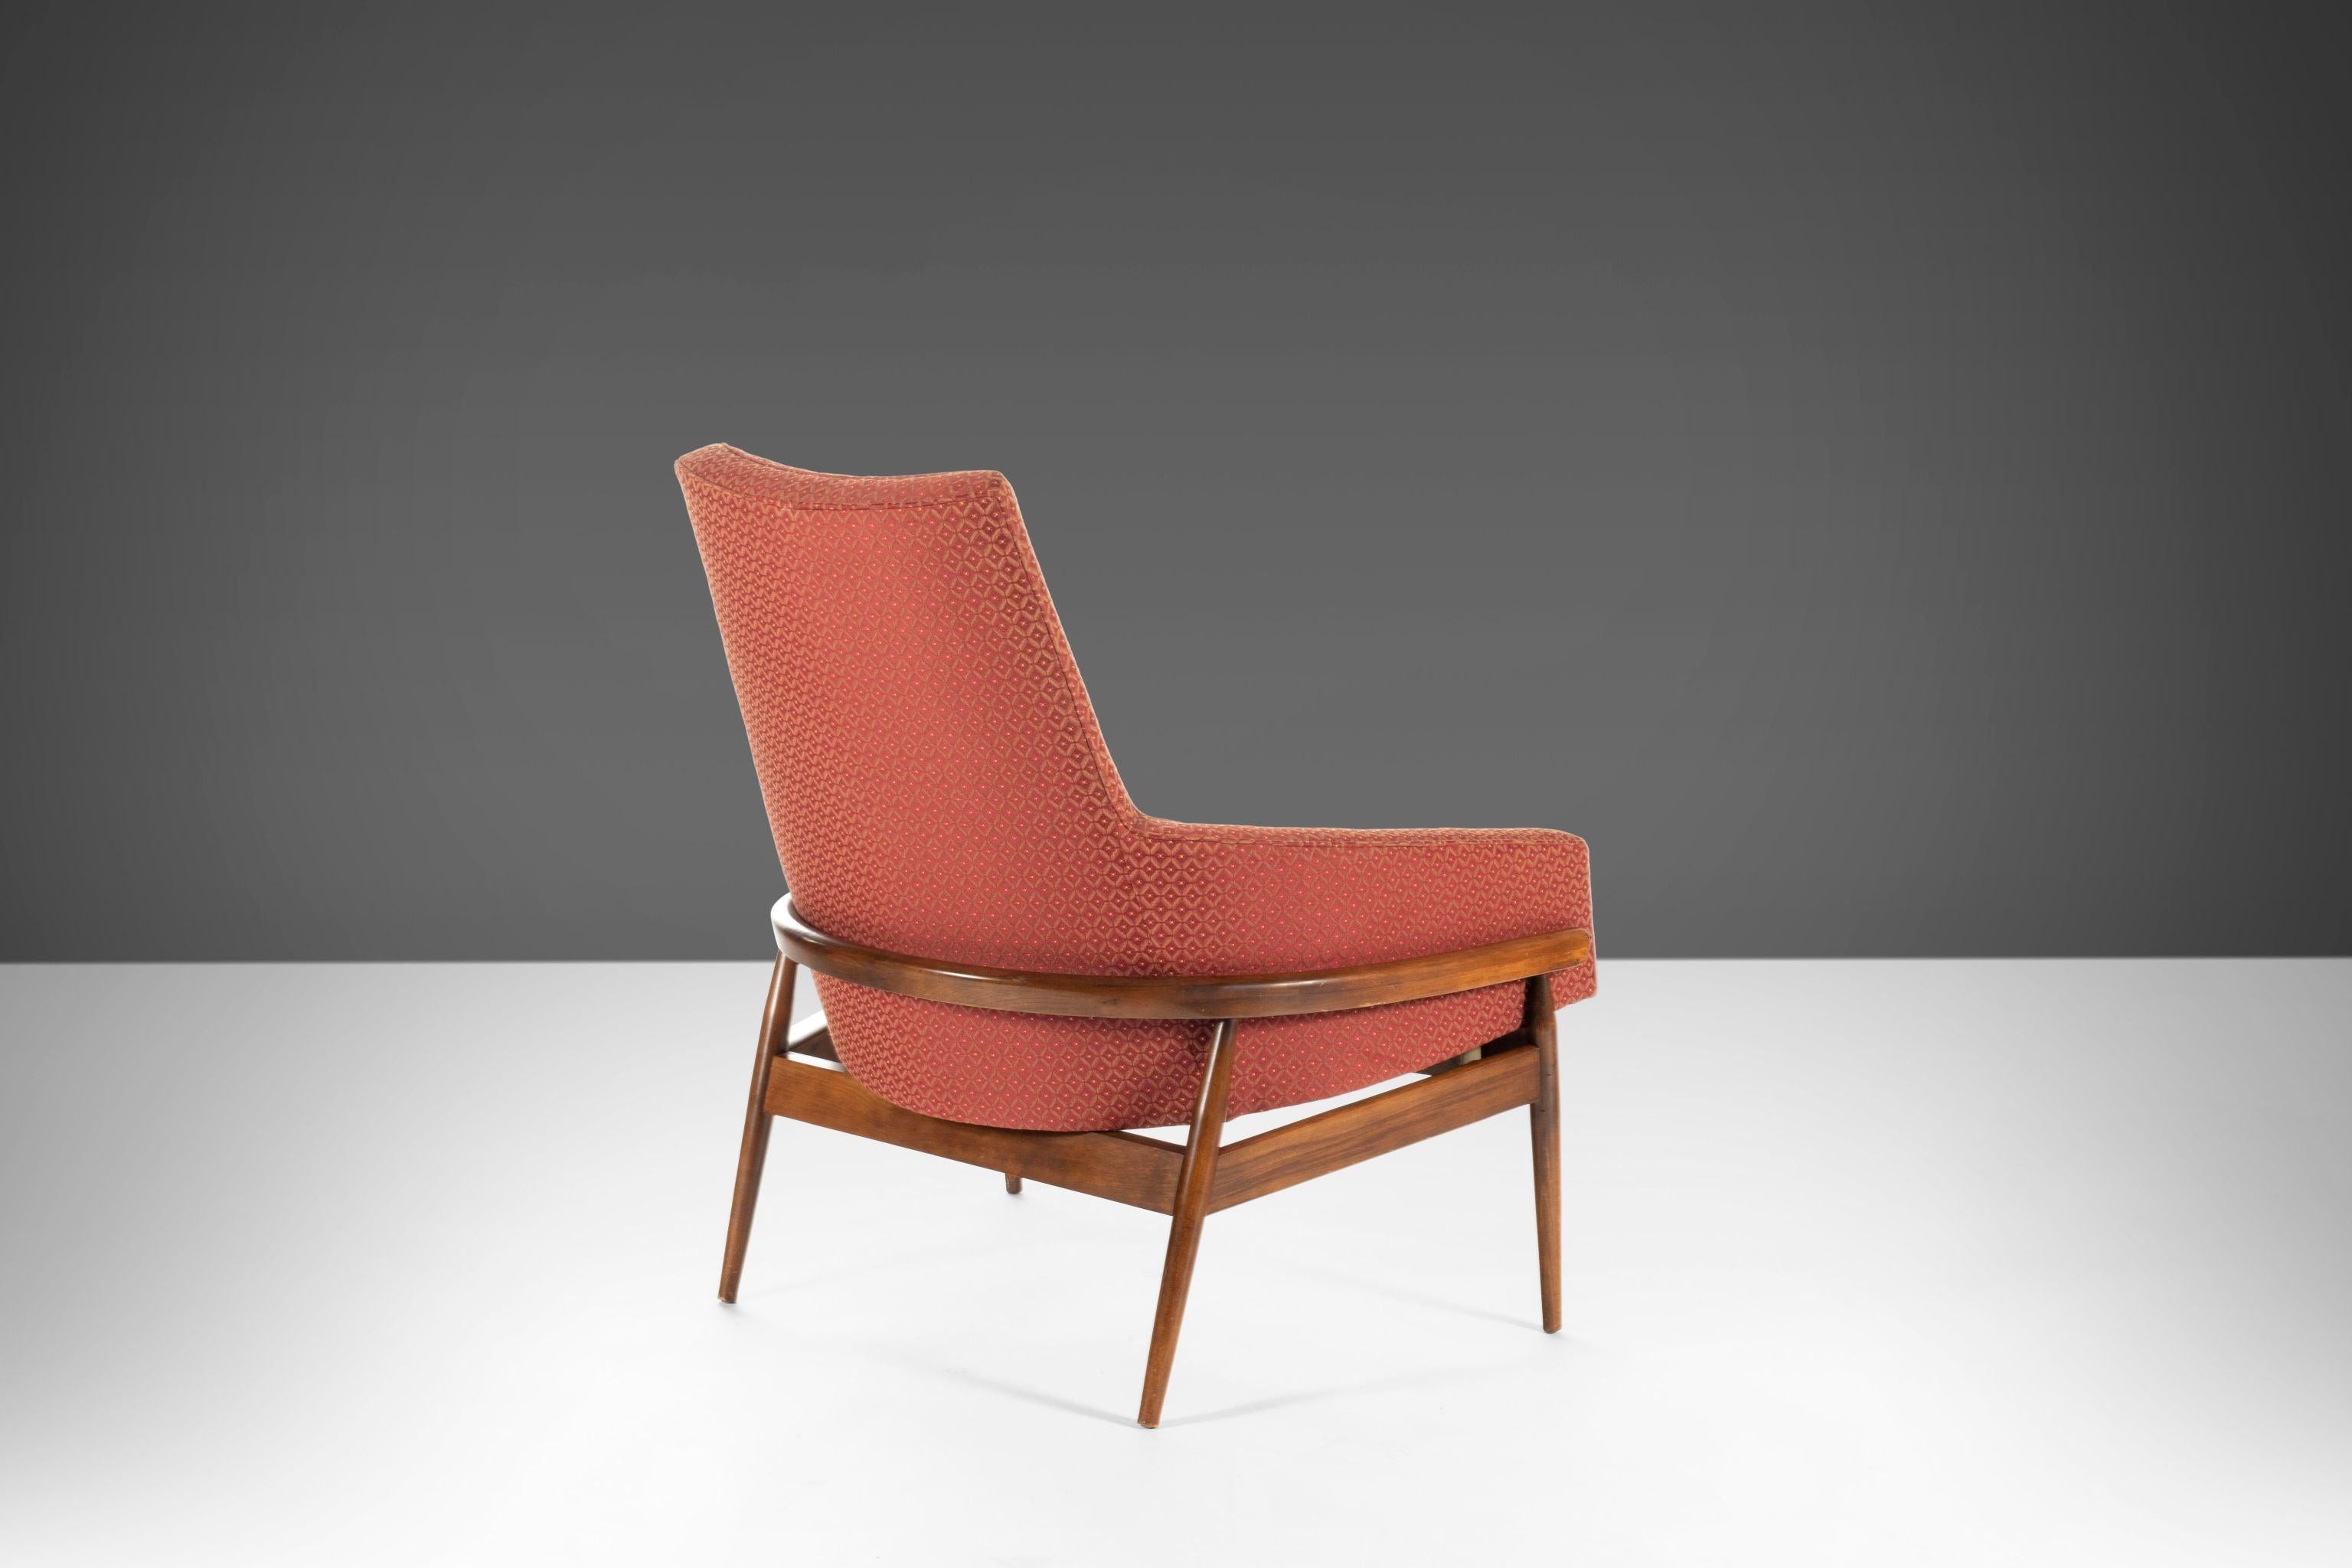 American Mid-Century Modern Ruby Red High Back Barrel Chair Fairfield Chair Co., c. 1960s For Sale